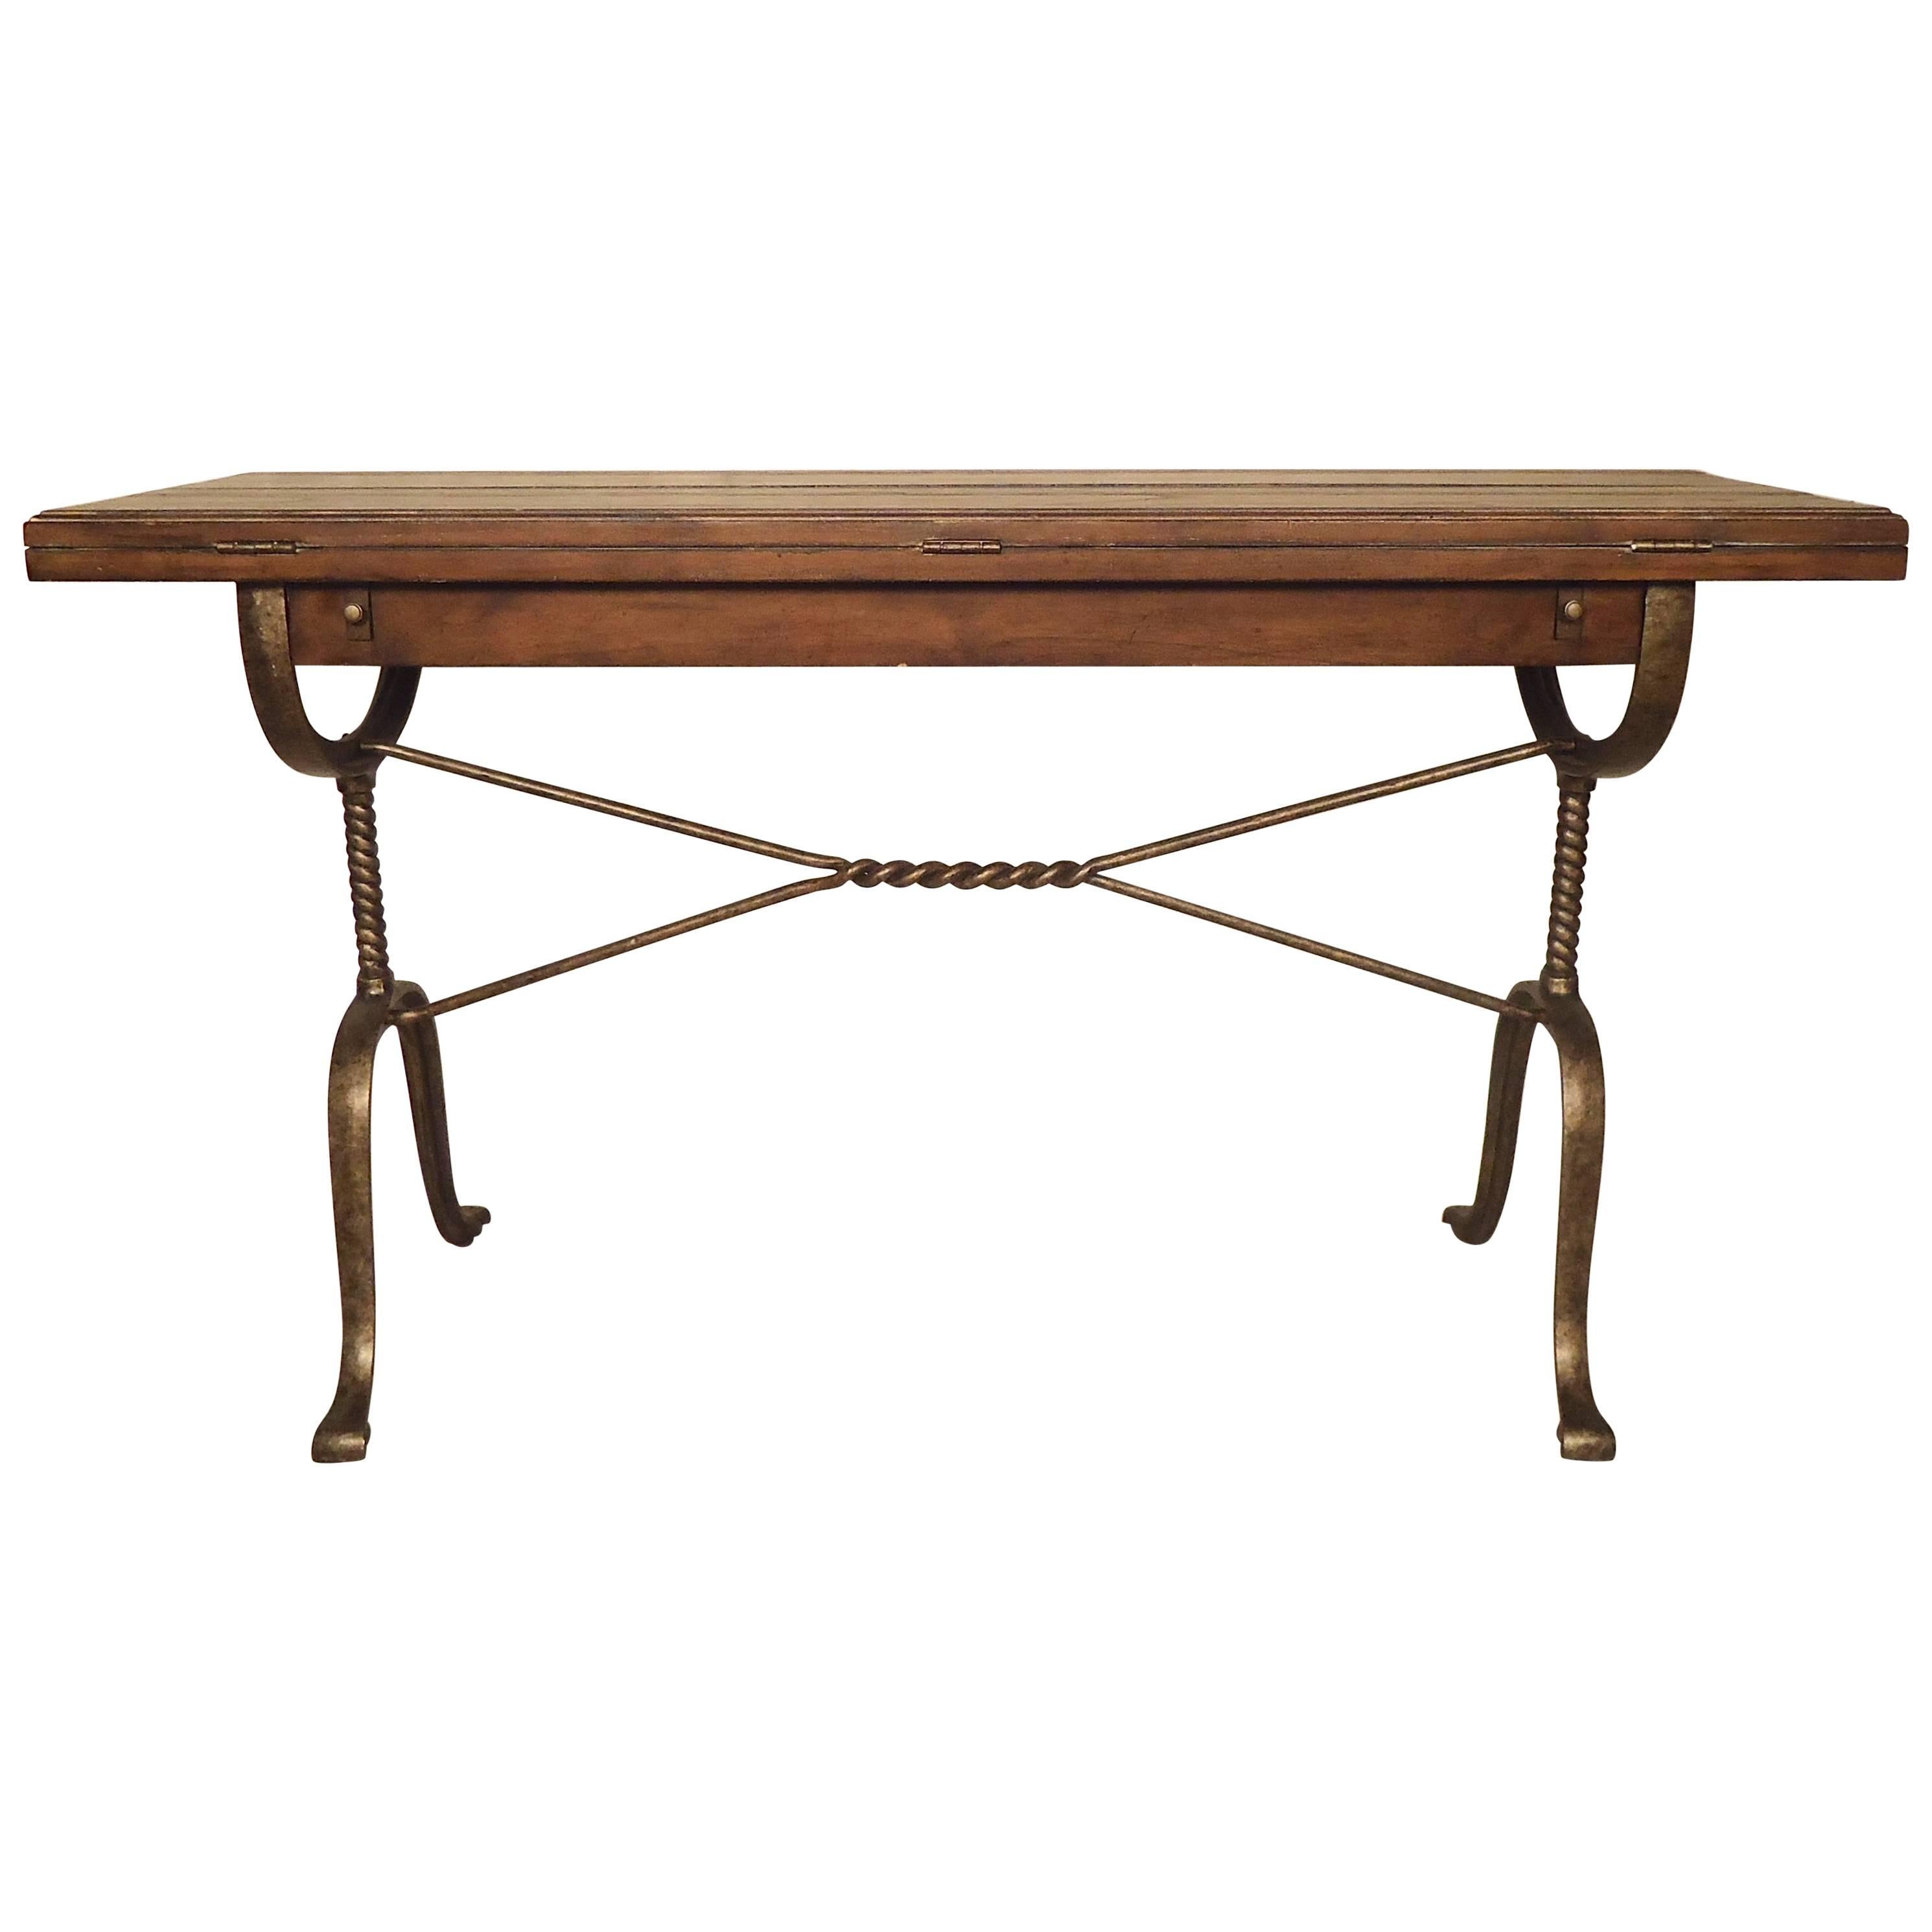 Rustic Style Extending Console or Dining Table